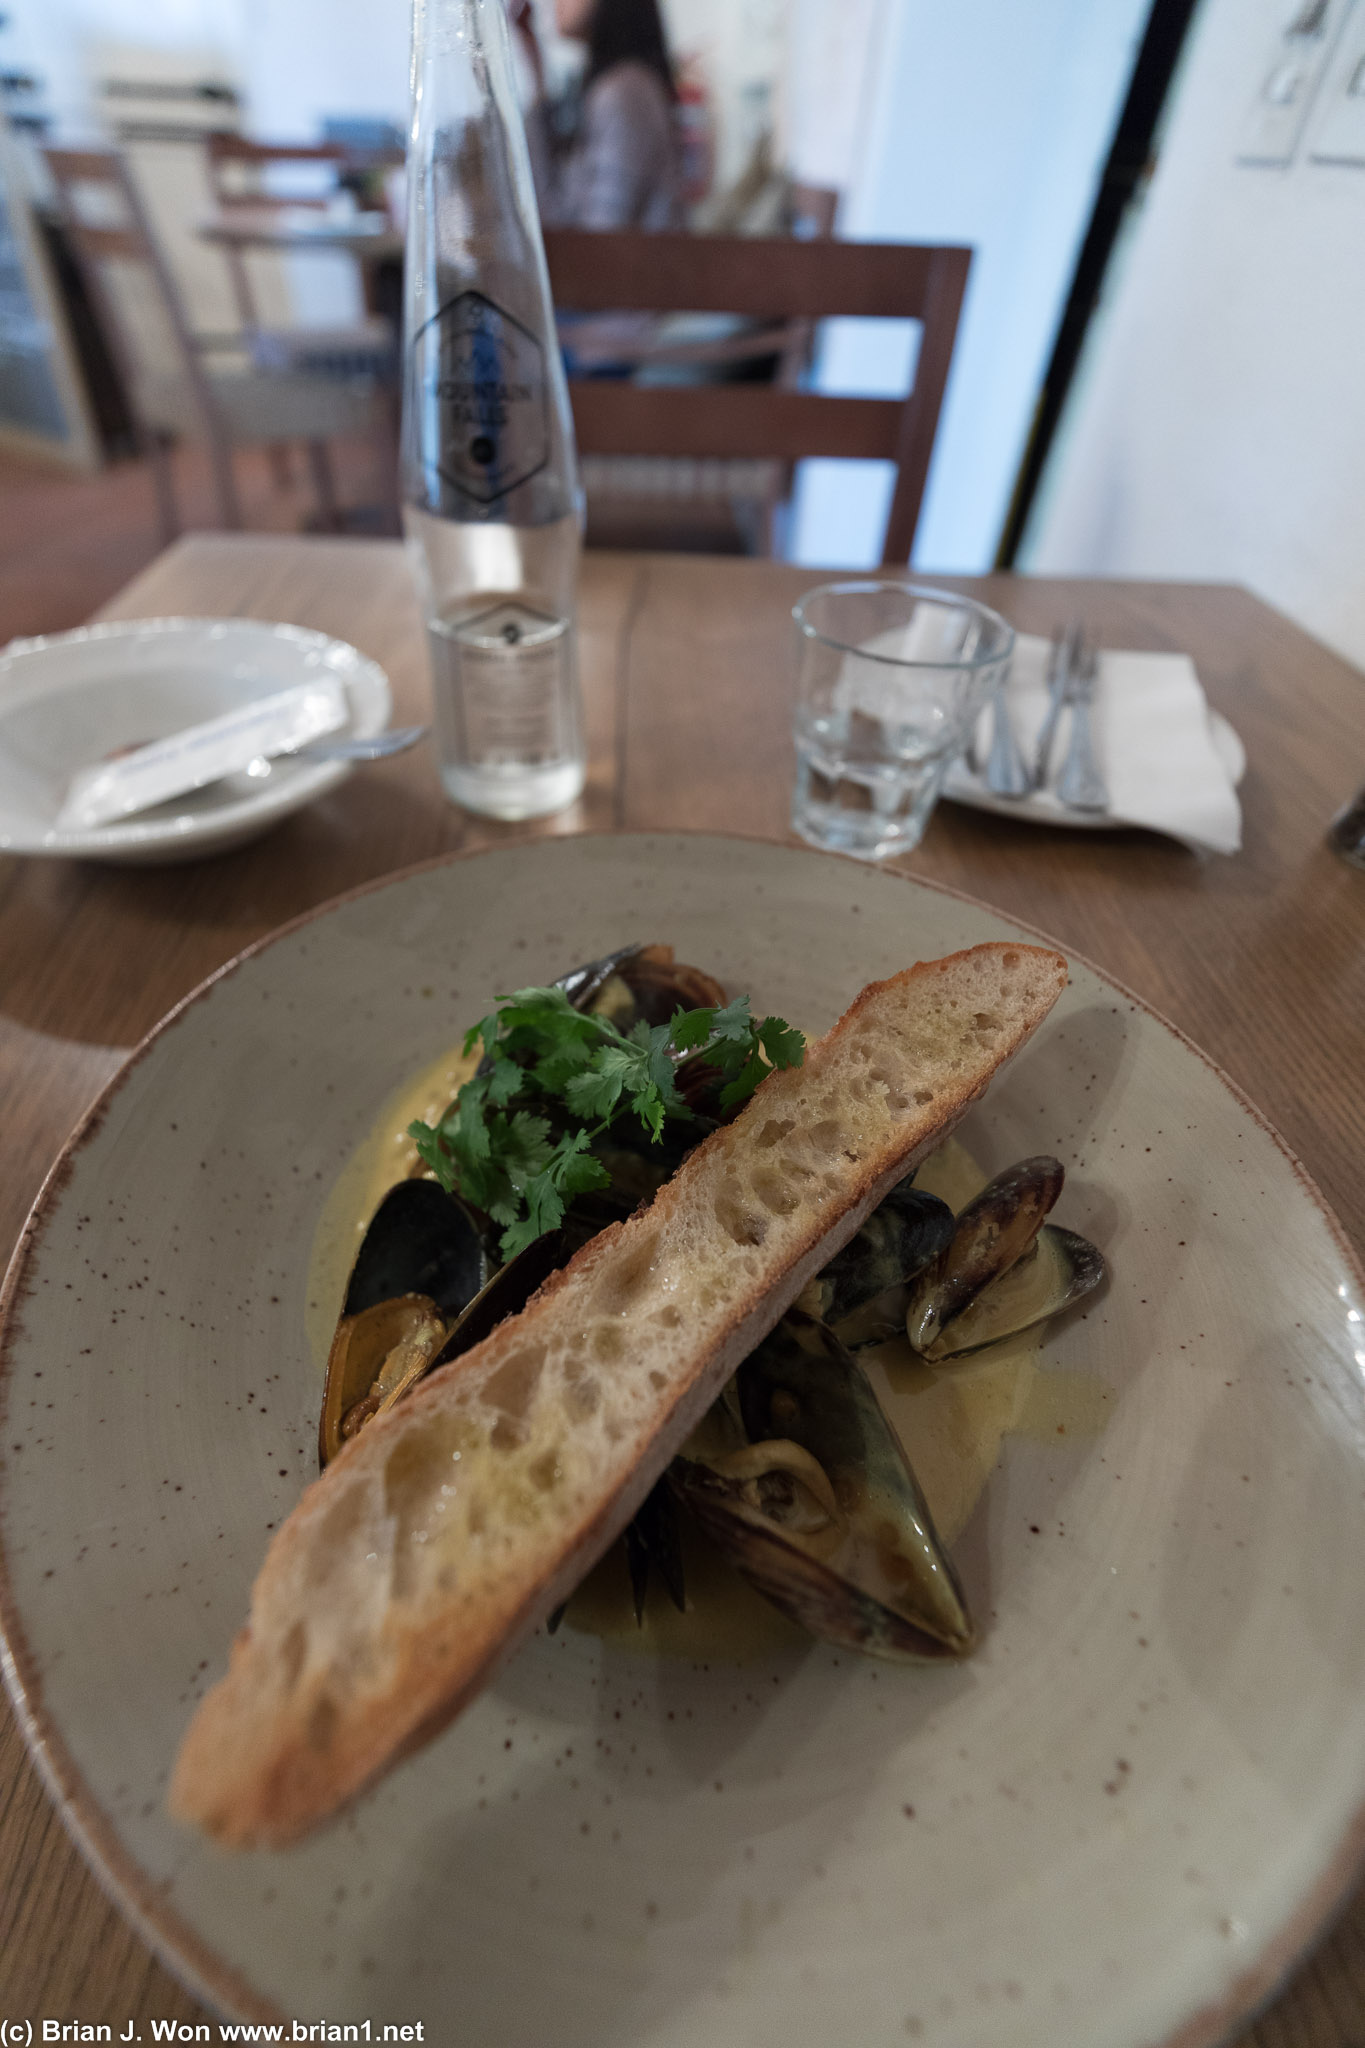 Mussels for lunch at Jonkershuis, one of two restaurants at Groot Constantia.